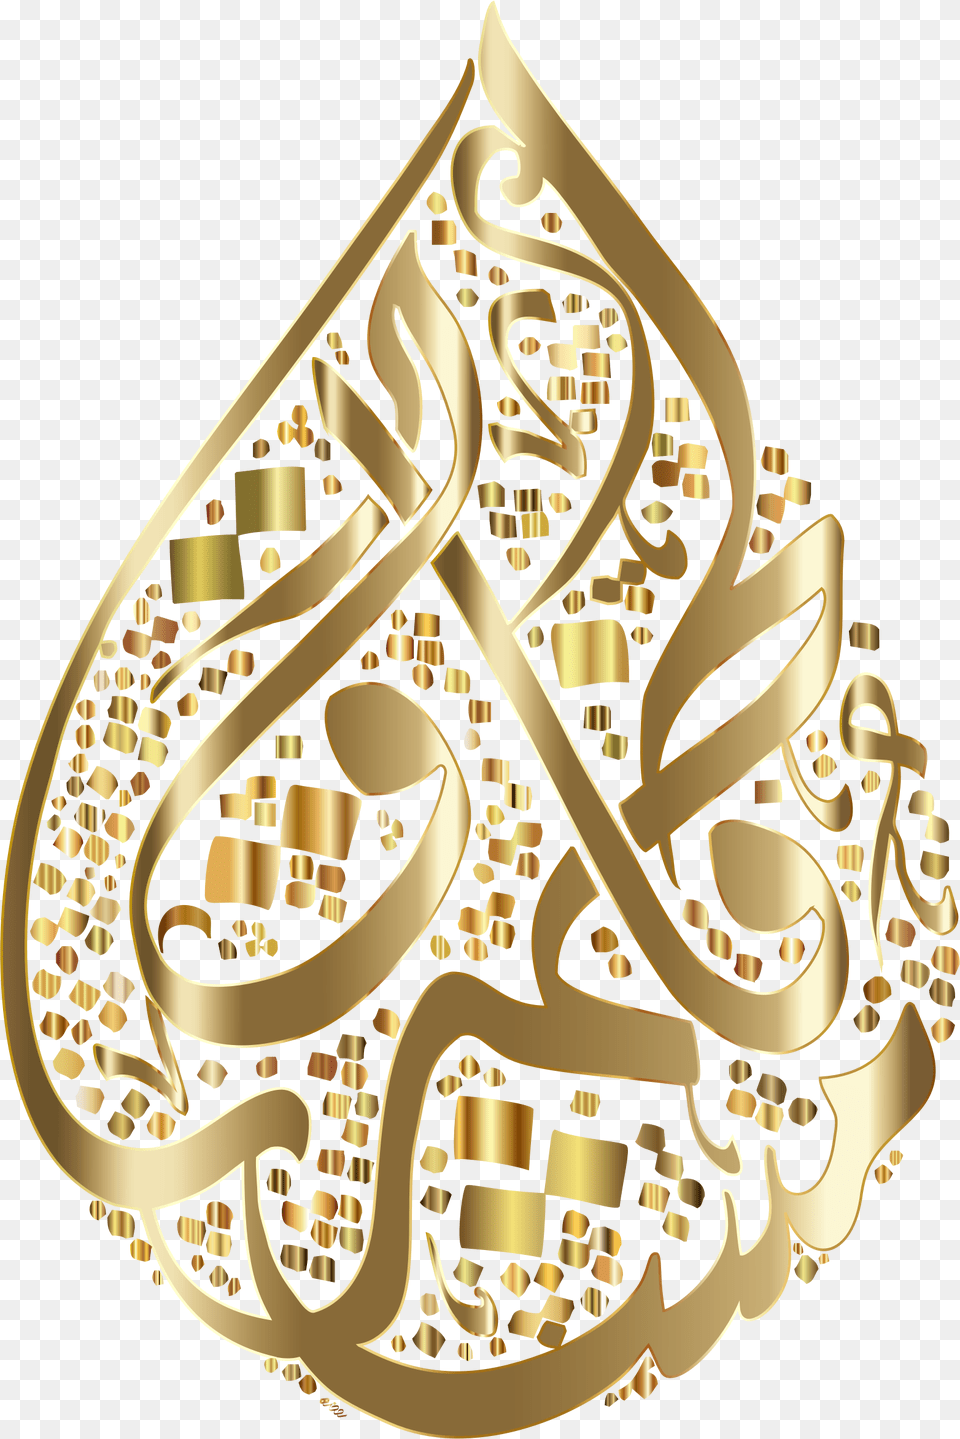 Arabic Symbol Of Love Arabic Calligraphy Art, Accessories, Gold, Chandelier, Lamp Free Png Download